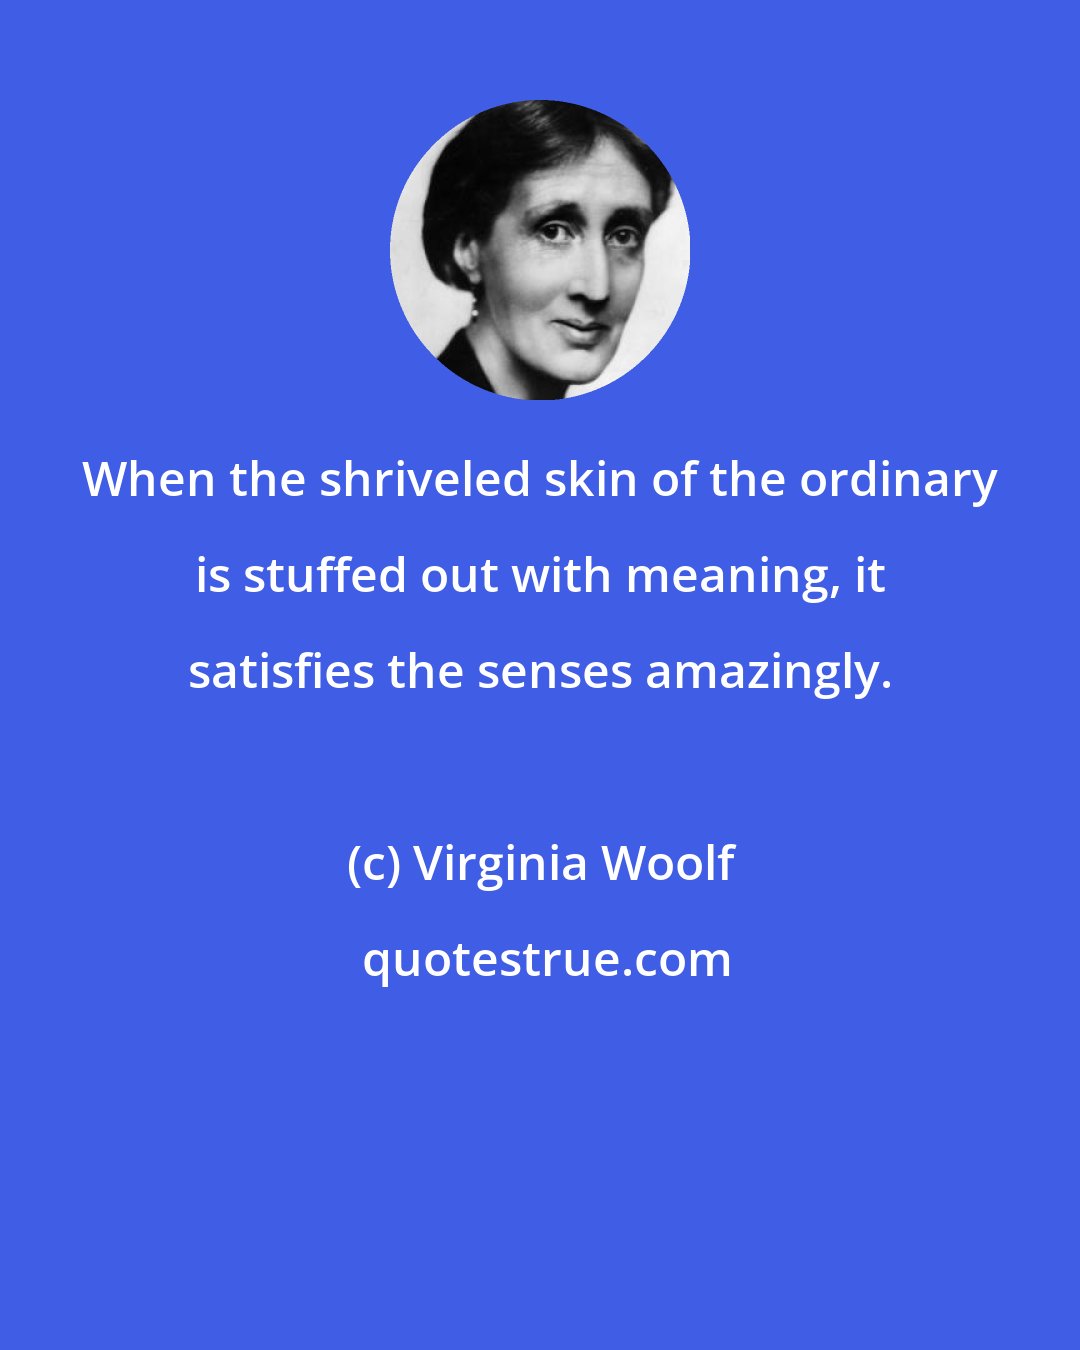 Virginia Woolf: When the shriveled skin of the ordinary is stuffed out with meaning, it satisfies the senses amazingly.